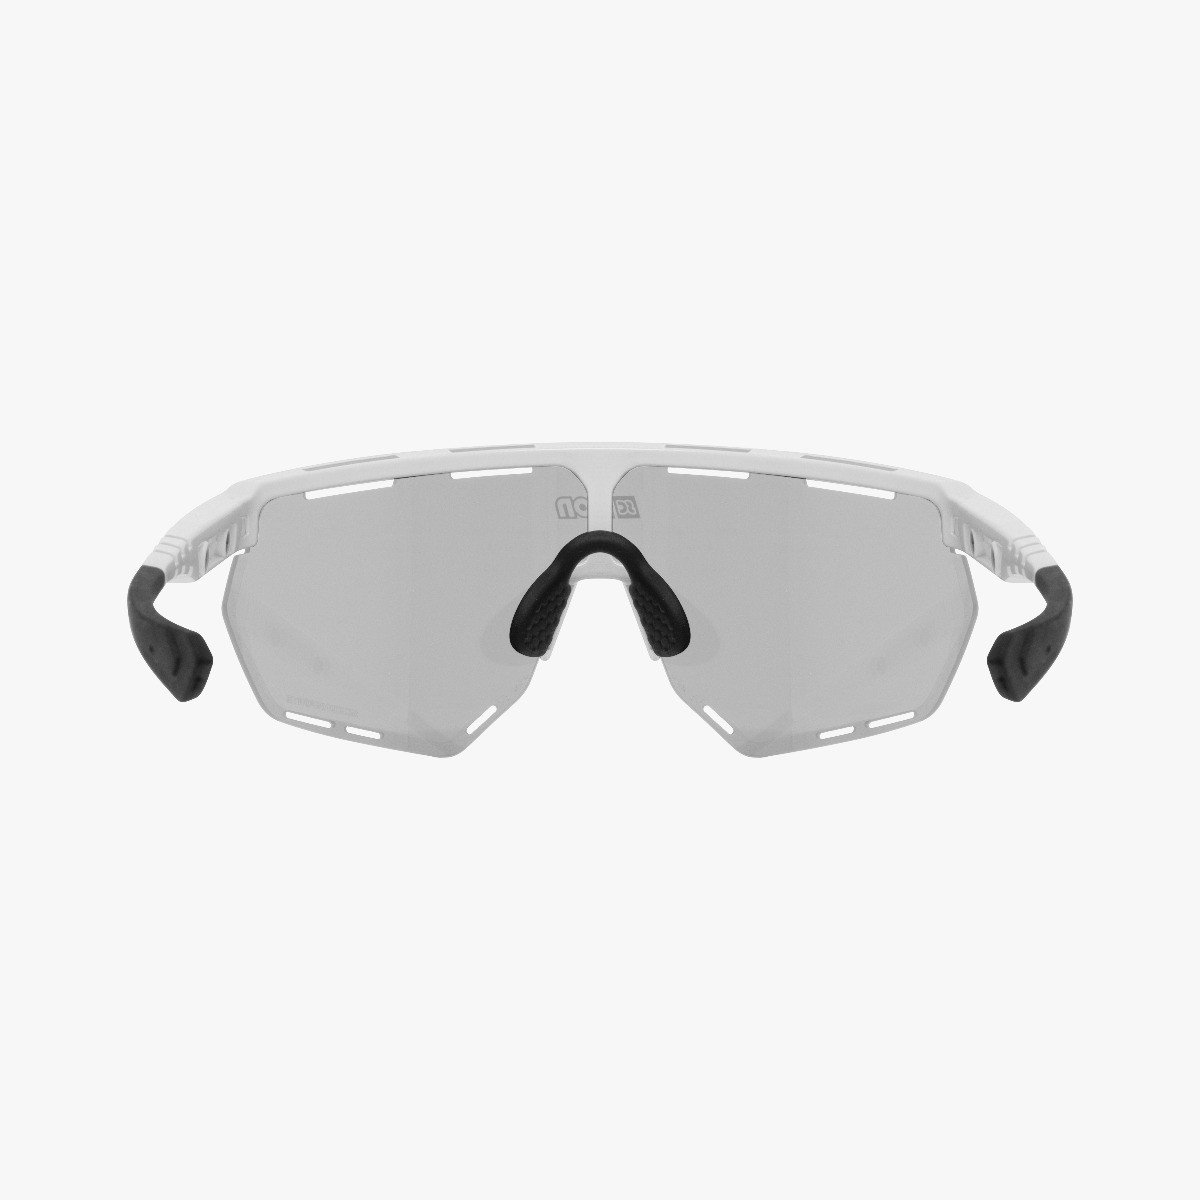 Scicon Sports | Aerowing Cycling Sport Performance Sunglasses - White Gloss / Photocromatic Silver - EY26010802